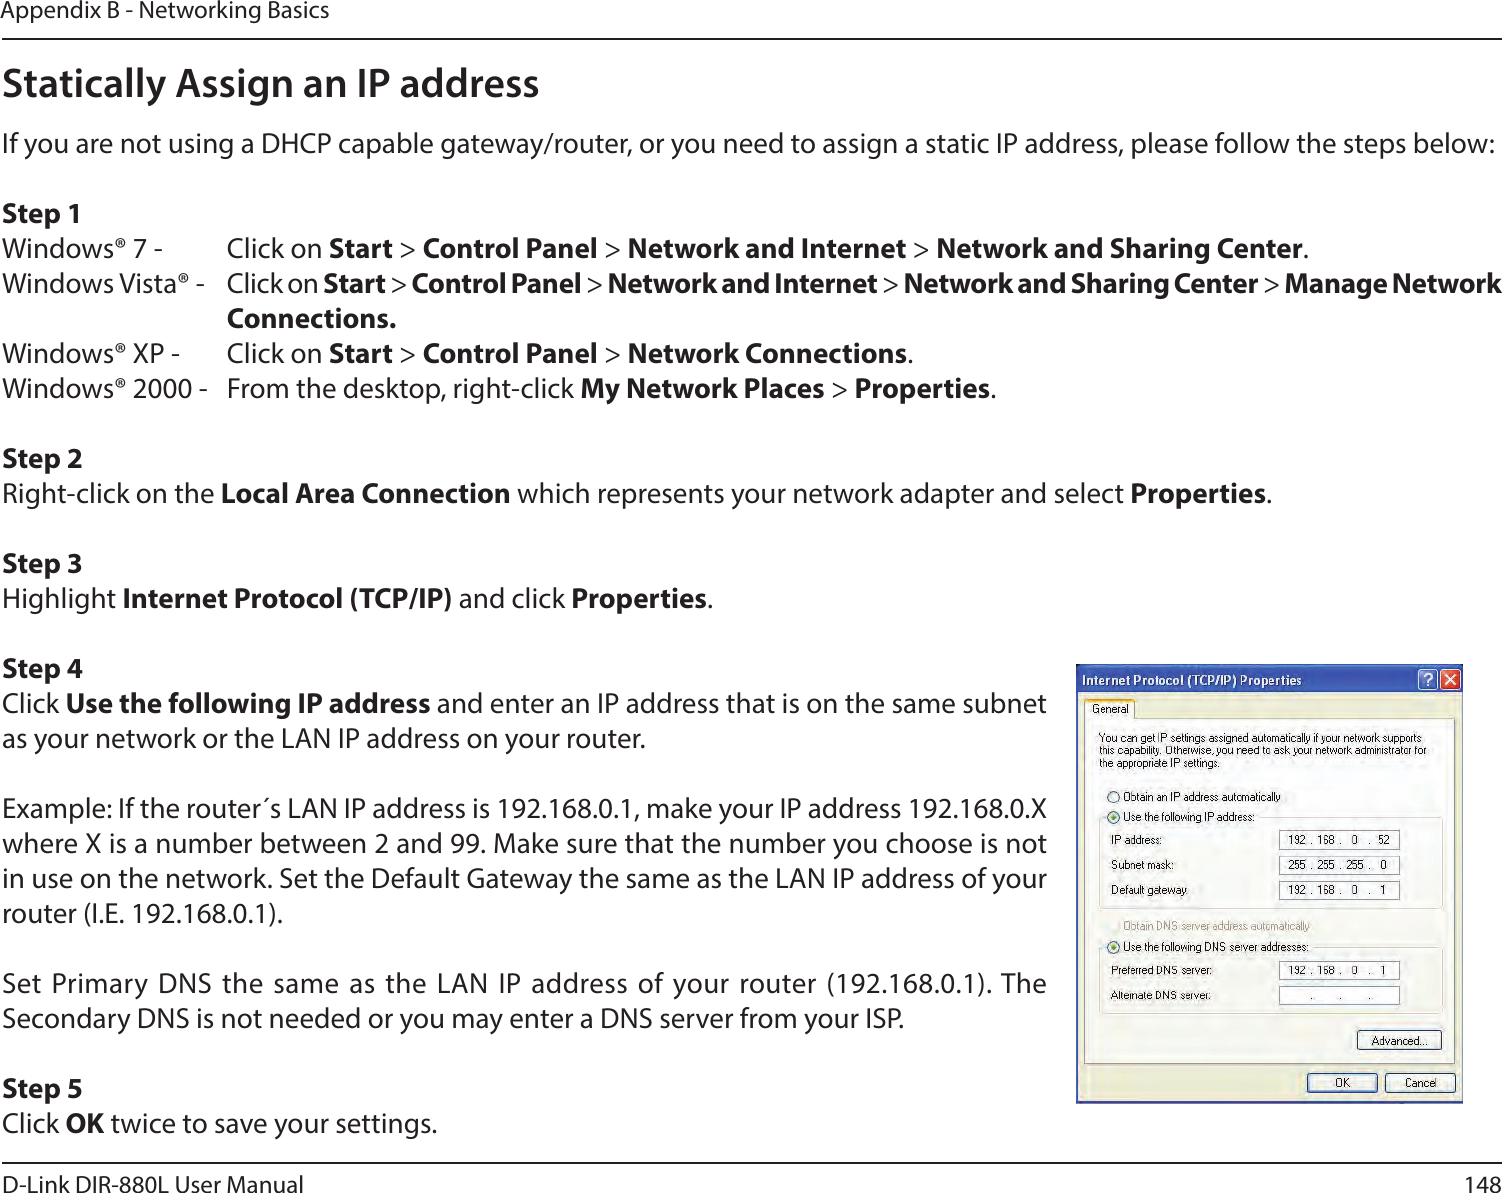 148D-Link DIR-880L User ManualAppendix B - Networking BasicsStatically Assign an IP addressIf you are not using a DHCP capable gateway/router, or you need to assign a static IP address, please follow the steps below:Step 1Windows® 7 -  Click on Start &gt; Control Panel &gt; Network and Internet &gt; Network and Sharing Center.Windows Vista® -  Click on Start &gt; Control Panel &gt; Network and Internet &gt; Network and Sharing Center &gt; Manage Network      Connections.Windows® XP -  Click on Start &gt; Control Panel &gt; Network Connections.Windows® 2000 -  From the desktop, right-click My Network Places &gt; Properties.Step 2Right-click on the Local Area Connection which represents your network adapter and select Properties.Step 3Highlight Internet Protocol (TCP/IP) and click Properties.Step 4Click Use the following IP address and enter an IP address that is on the same subnet as your network or the LAN IP address on your router. Example: If the router´s LAN IP address is 192.168.0.1, make your IP address 192.168.0.X where X is a number between 2 and 99. Make sure that the number you choose is not in use on the network. Set the Default Gateway the same as the LAN IP address of your router (I.E. 192.168.0.1). Set Primary  DNS the  same as  the LAN  IP  address of your  router  (192.168.0.1). The Secondary DNS is not needed or you may enter a DNS server from your ISP.Step 5Click OK twice to save your settings.